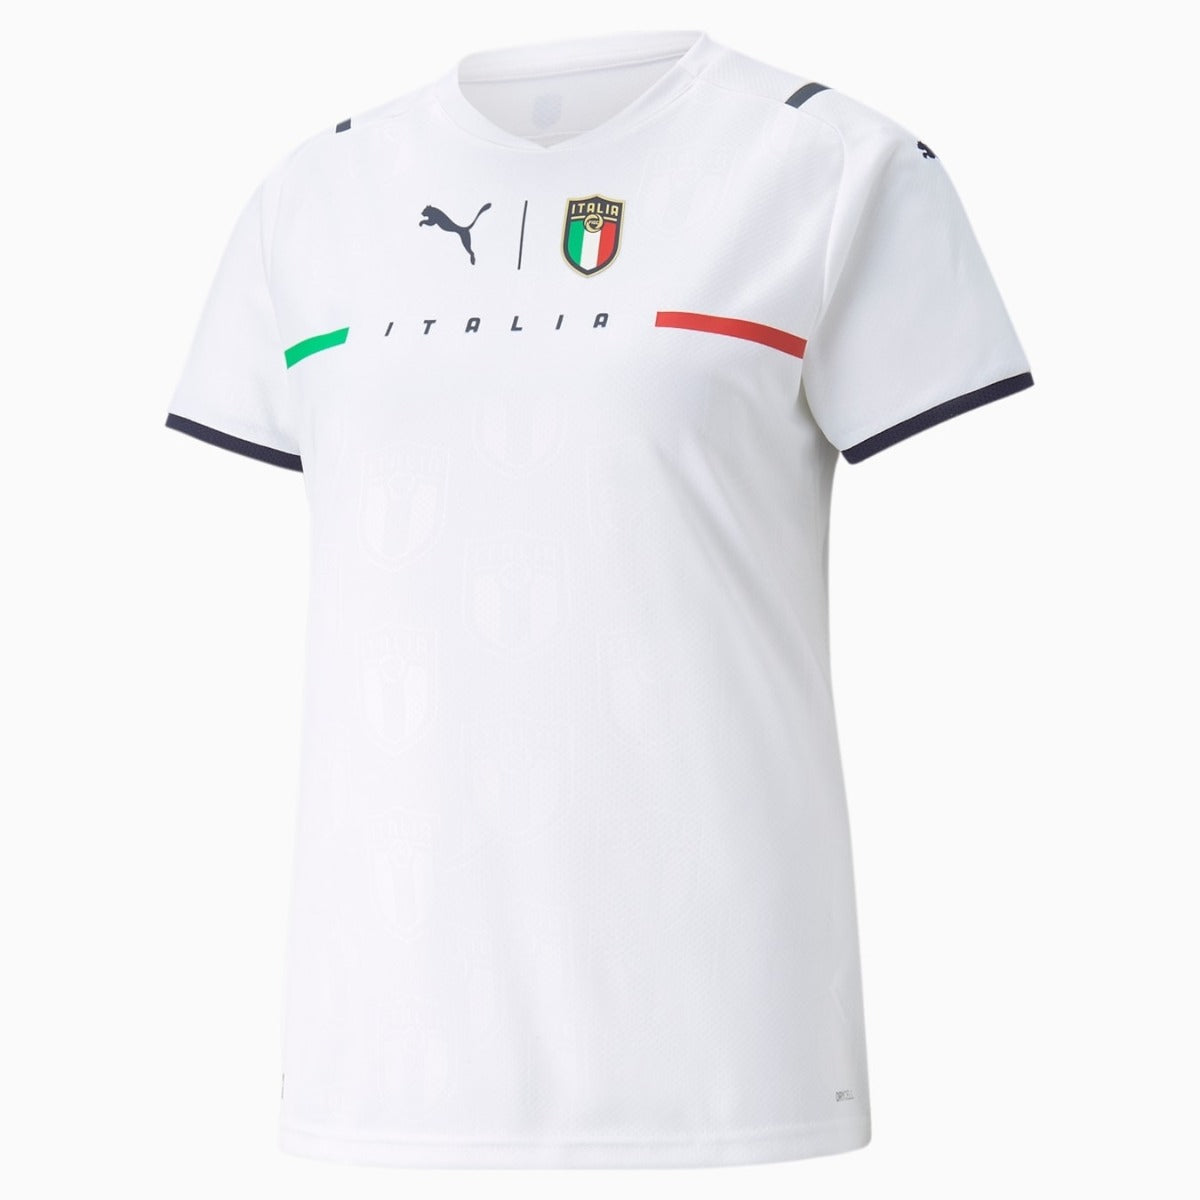 adidas Football Italy FIGC jersey in bright green